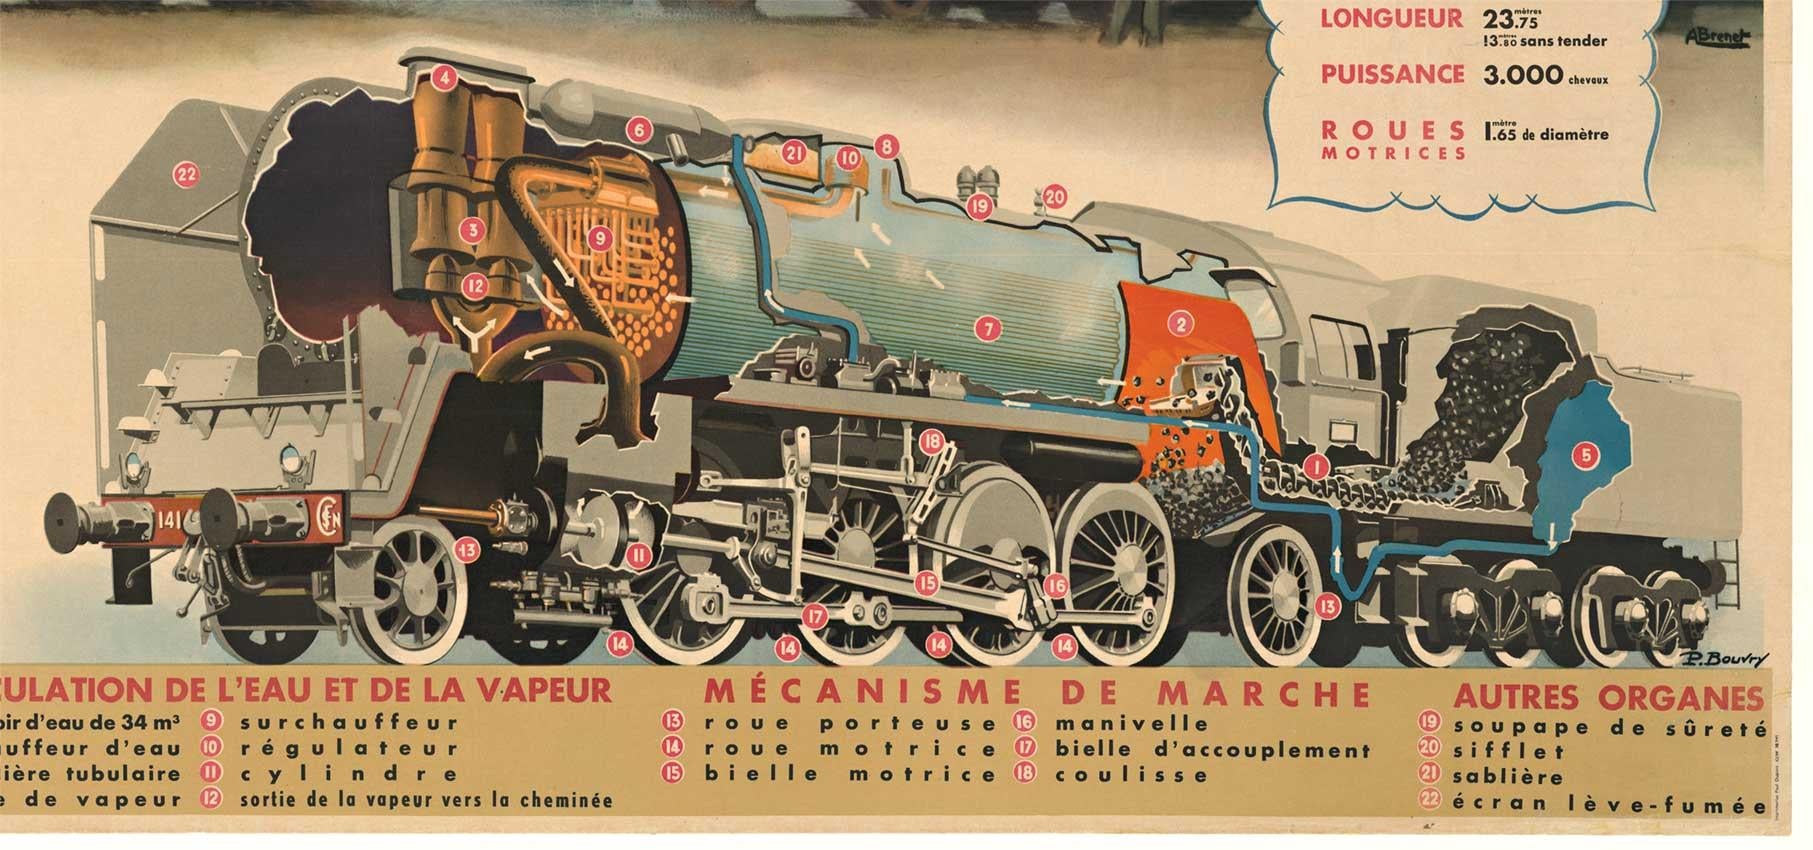 Original poster:  LOCOMOTIVE A VAPEUR.   Type 141 P. 
Artist:  A. Bouvry and Albert Brenert   Horizontal railway poster that has been archival linen backed, ready to frame.   Very good condition.

Albert Brenet was known for his railway and railroad